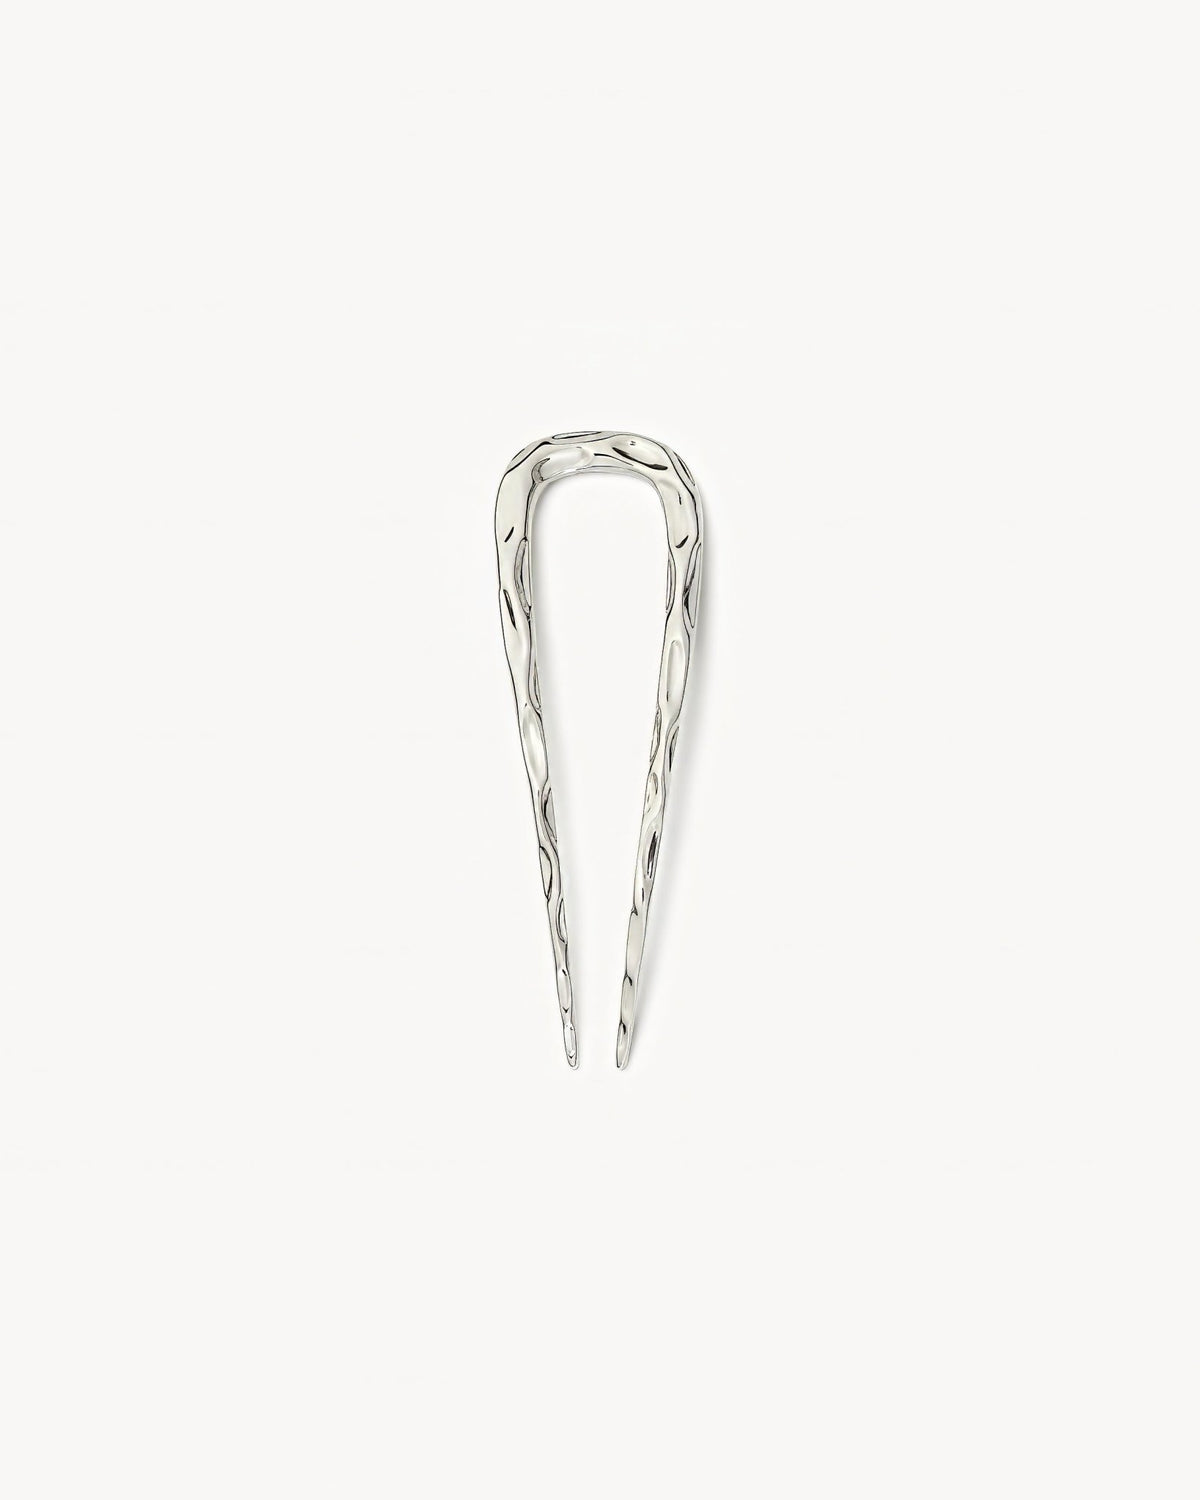 Petite Wavy French Hair Pin in Silver